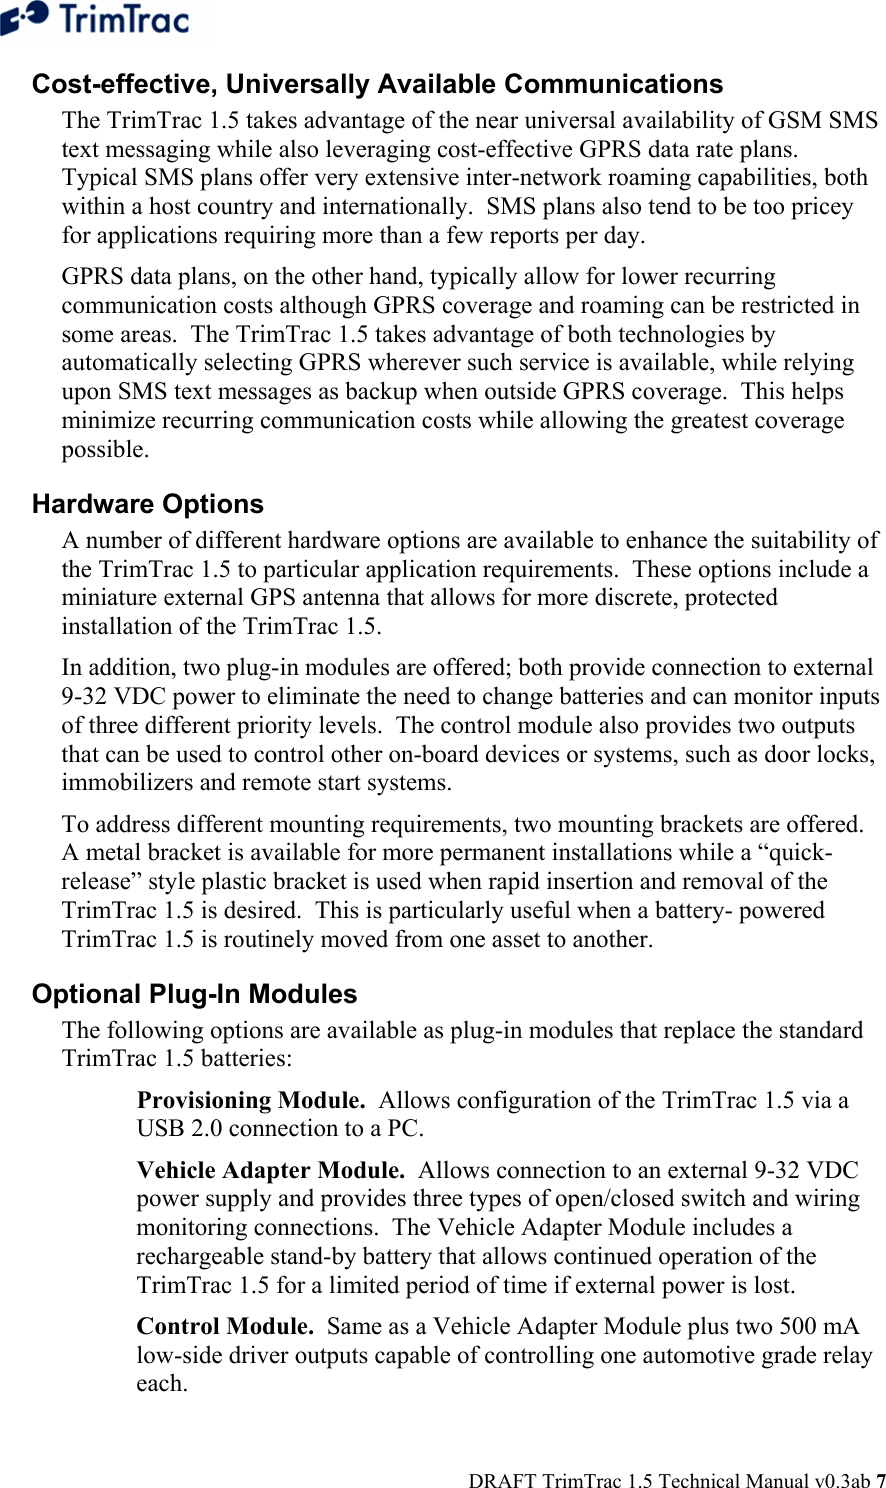  DRAFT TrimTrac 1.5 Technical Manual v0.3ab 7 Cost-effective, Universally Available Communications The TrimTrac 1.5 takes advantage of the near universal availability of GSM SMS text messaging while also leveraging cost-effective GPRS data rate plans.  Typical SMS plans offer very extensive inter-network roaming capabilities, both within a host country and internationally.  SMS plans also tend to be too pricey for applications requiring more than a few reports per day.   GPRS data plans, on the other hand, typically allow for lower recurring communication costs although GPRS coverage and roaming can be restricted in some areas.  The TrimTrac 1.5 takes advantage of both technologies by automatically selecting GPRS wherever such service is available, while relying upon SMS text messages as backup when outside GPRS coverage.  This helps minimize recurring communication costs while allowing the greatest coverage possible.   Hardware Options A number of different hardware options are available to enhance the suitability of the TrimTrac 1.5 to particular application requirements.  These options include a miniature external GPS antenna that allows for more discrete, protected installation of the TrimTrac 1.5. In addition, two plug-in modules are offered; both provide connection to external 9-32 VDC power to eliminate the need to change batteries and can monitor inputs of three different priority levels.  The control module also provides two outputs that can be used to control other on-board devices or systems, such as door locks, immobilizers and remote start systems. To address different mounting requirements, two mounting brackets are offered.  A metal bracket is available for more permanent installations while a “quick-release” style plastic bracket is used when rapid insertion and removal of the TrimTrac 1.5 is desired.  This is particularly useful when a battery- powered TrimTrac 1.5 is routinely moved from one asset to another. Optional Plug-In Modules The following options are available as plug-in modules that replace the standard TrimTrac 1.5 batteries:  Provisioning Module.  Allows configuration of the TrimTrac 1.5 via a USB 2.0 connection to a PC.  Vehicle Adapter Module.  Allows connection to an external 9-32 VDC power supply and provides three types of open/closed switch and wiring monitoring connections.  The Vehicle Adapter Module includes a rechargeable stand-by battery that allows continued operation of the TrimTrac 1.5 for a limited period of time if external power is lost. Control Module.  Same as a Vehicle Adapter Module plus two 500 mA low-side driver outputs capable of controlling one automotive grade relay each. 